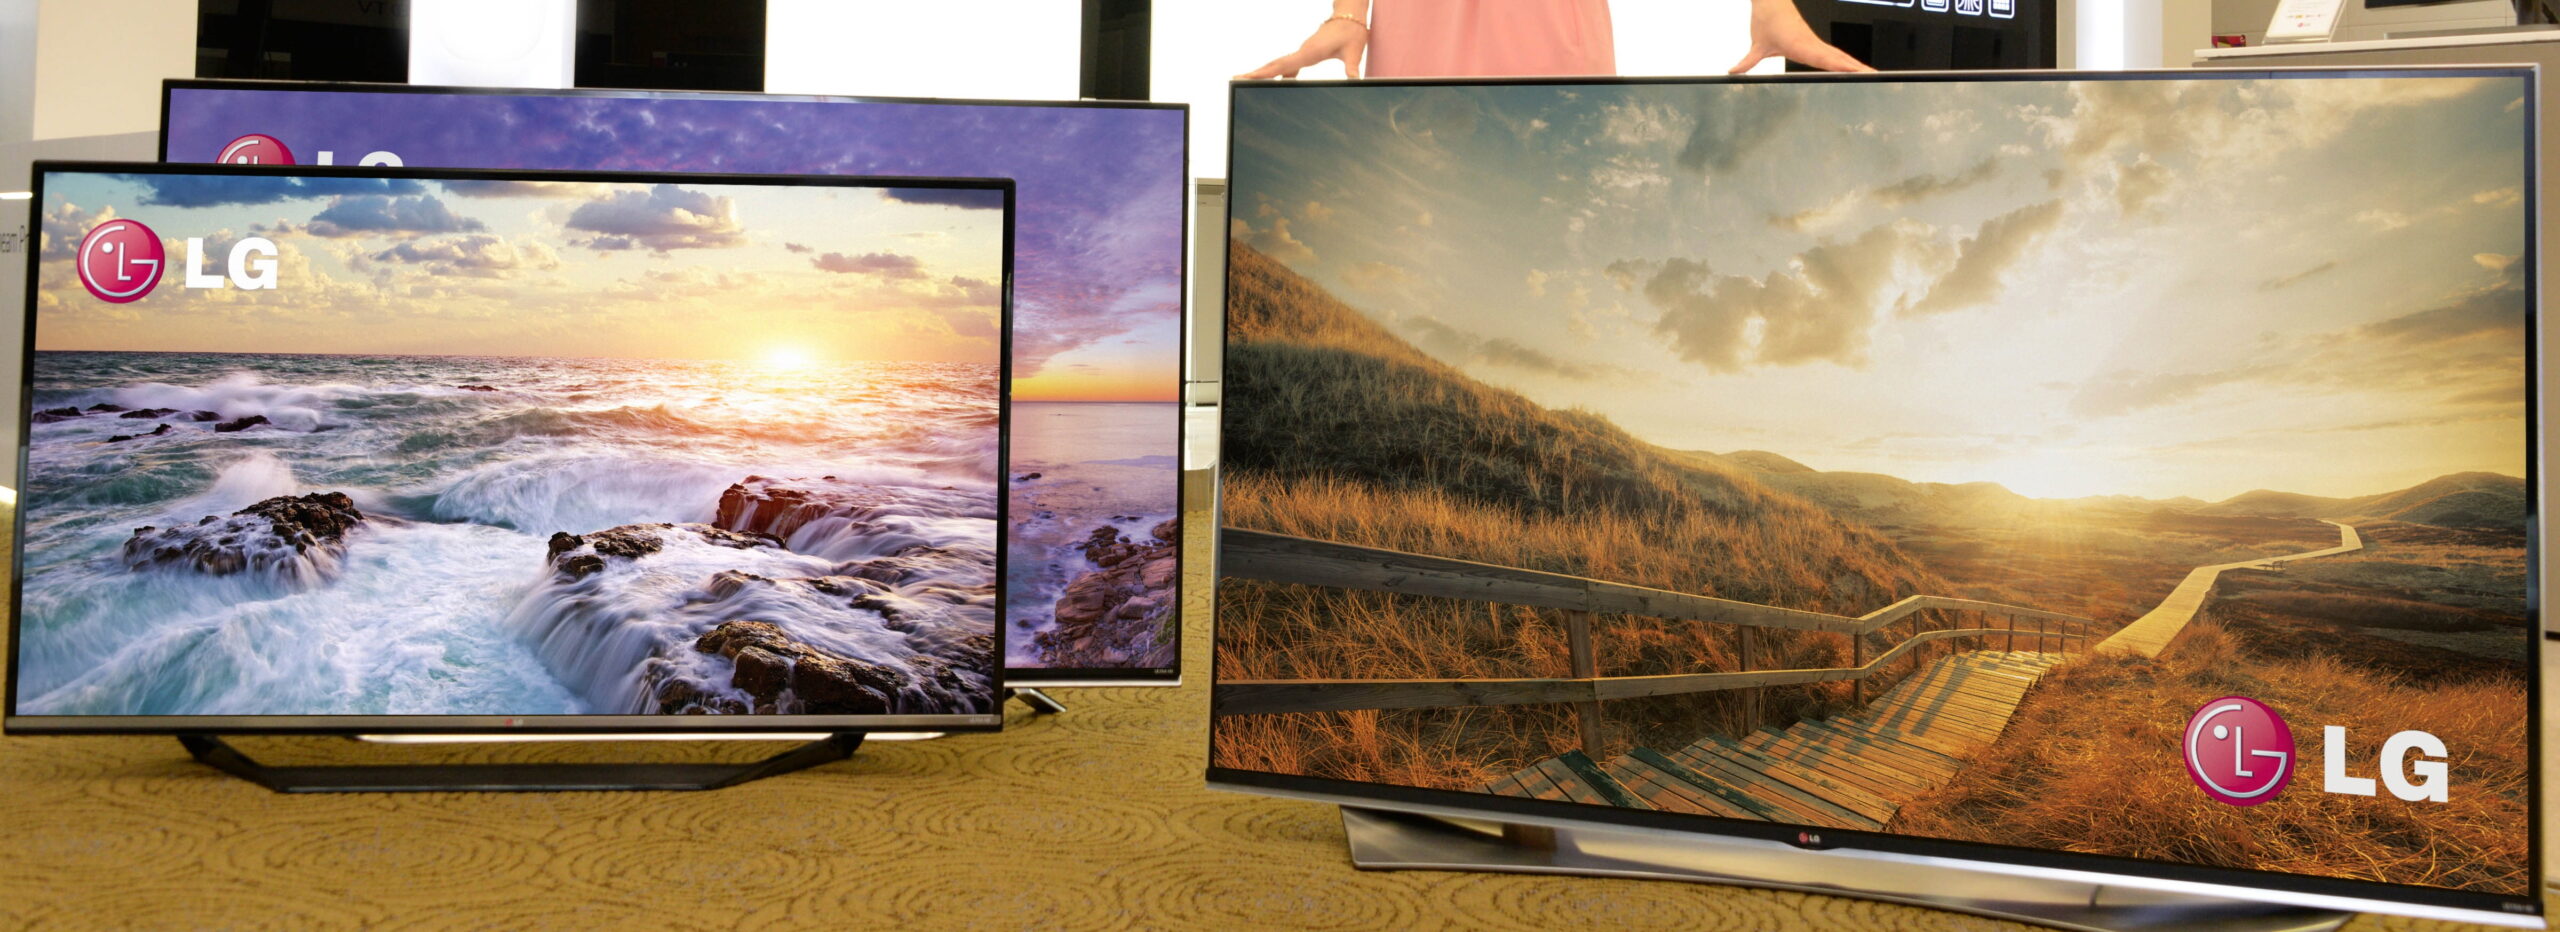 Two side-by-side LG 4K ULTRA HD TVs in the front of another LG TV